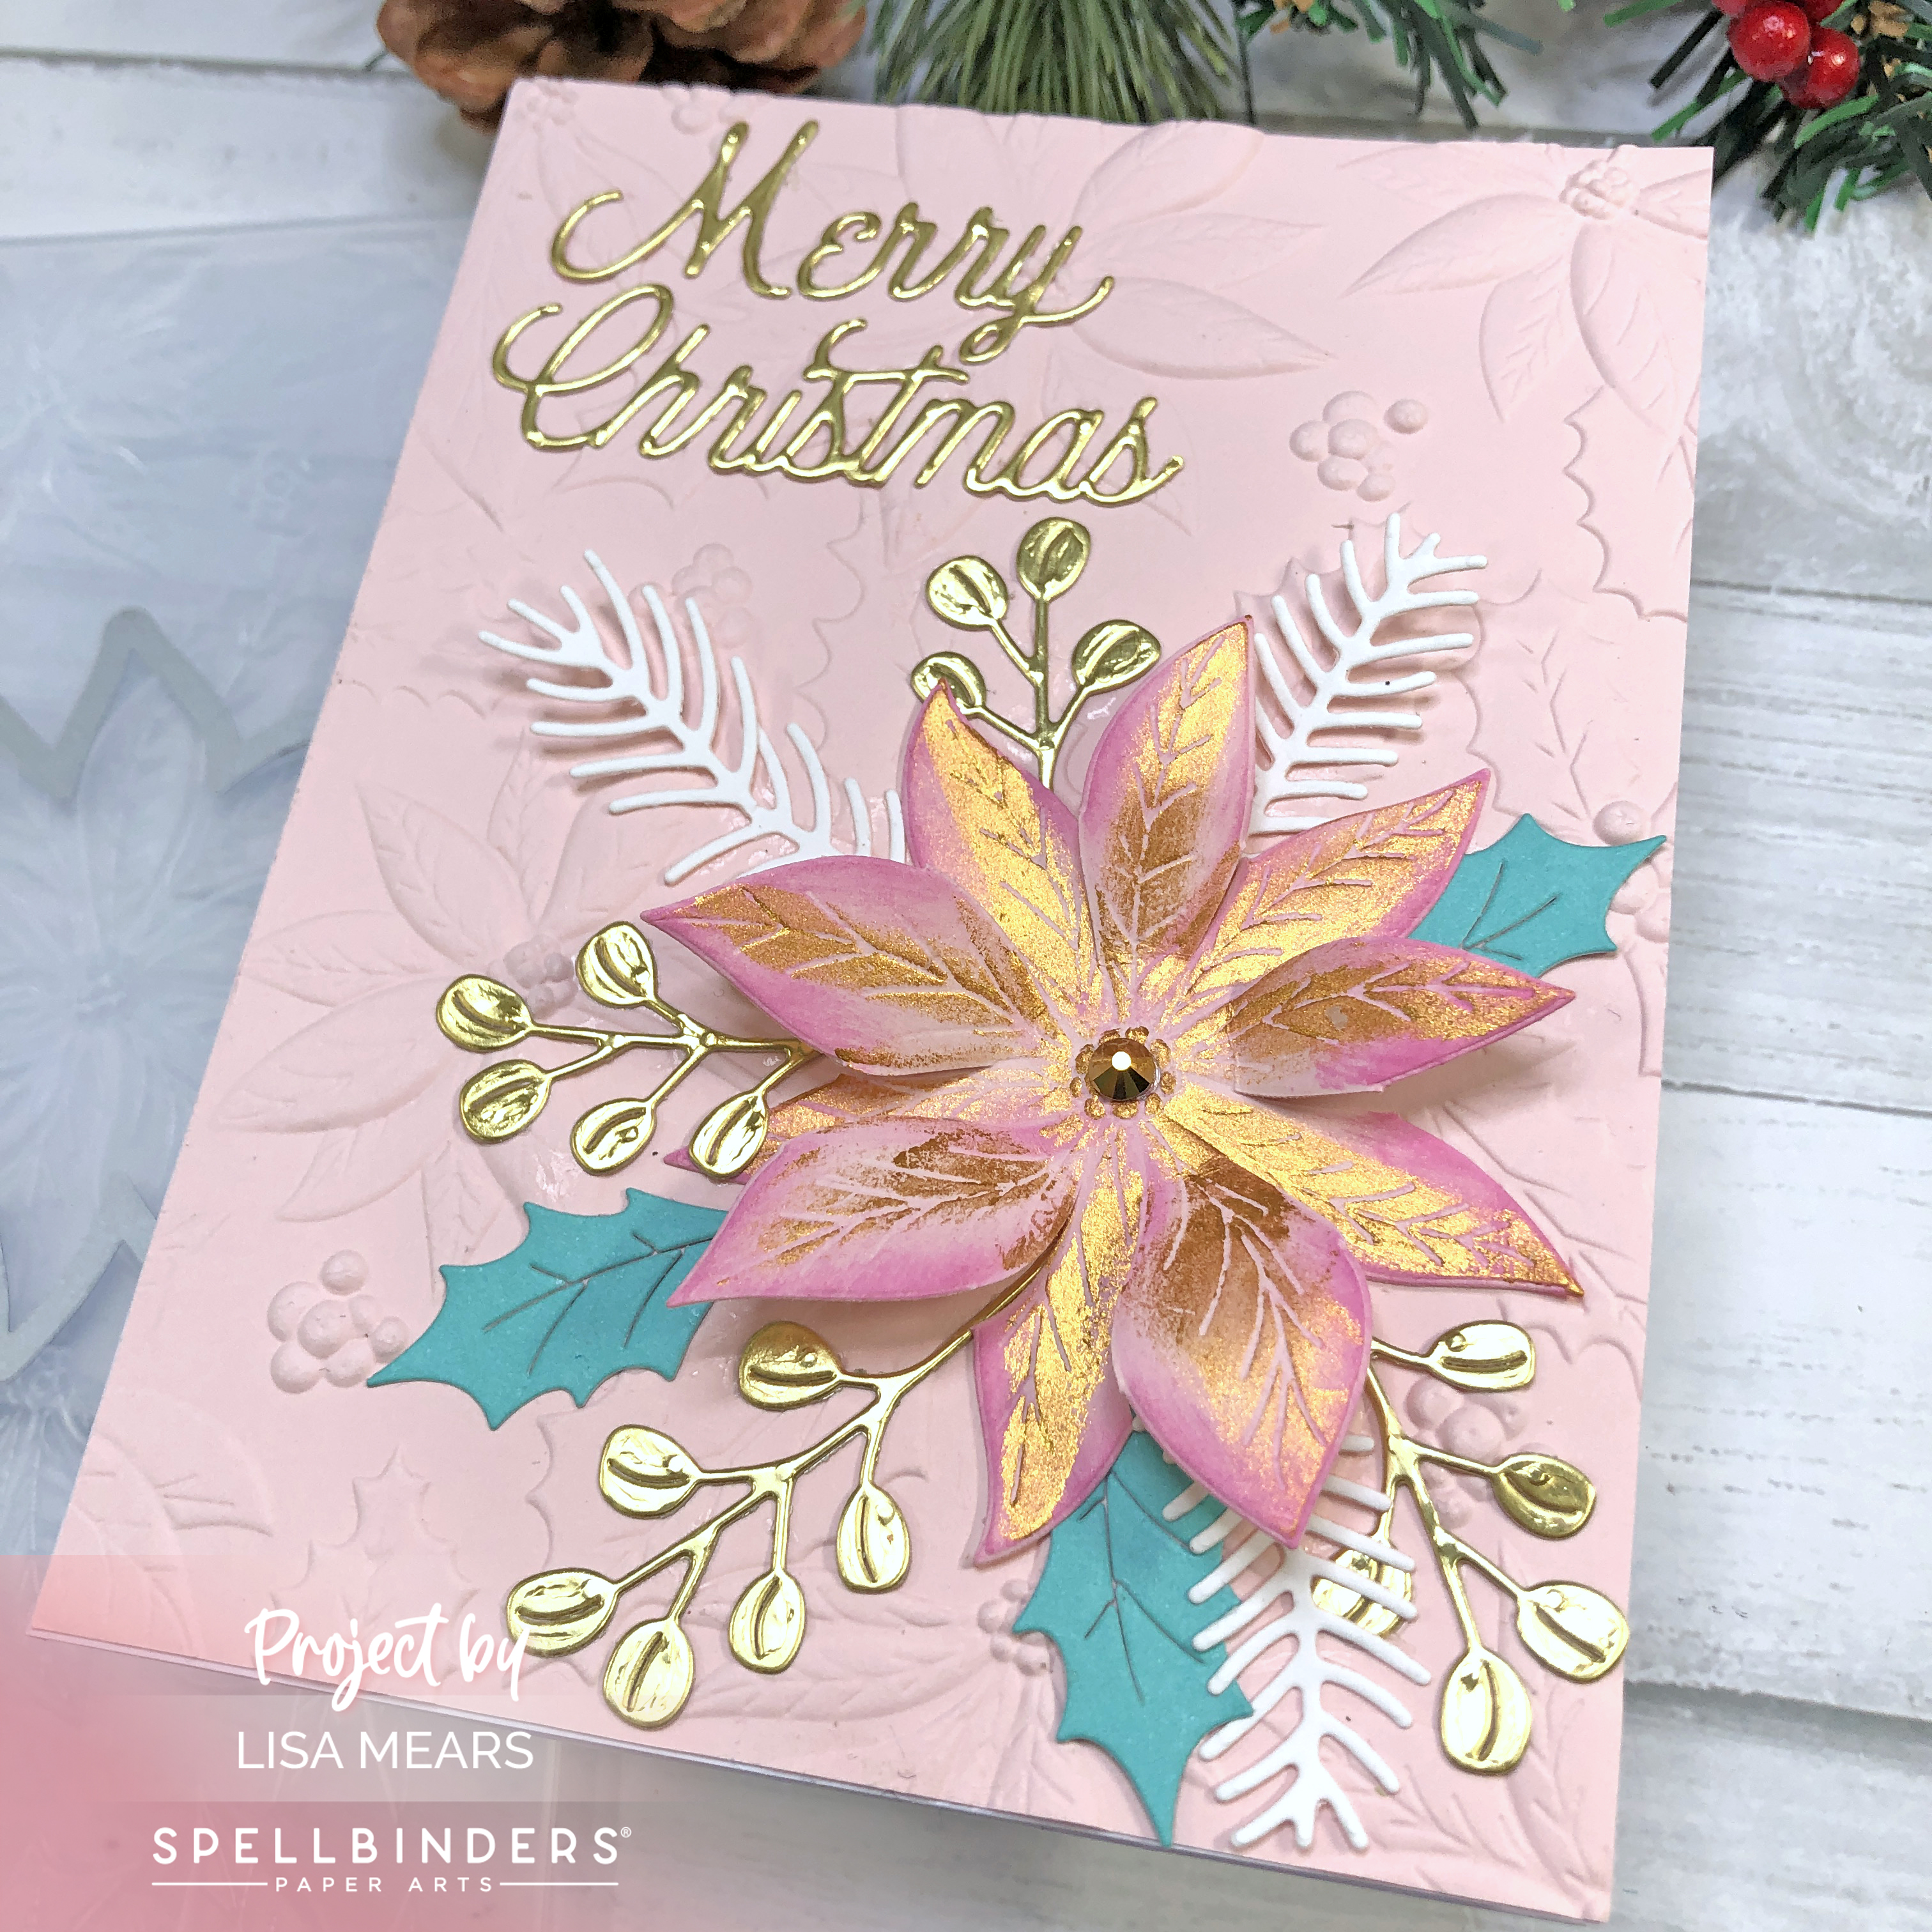 Simon's Snow Globes Collection - Playful Poinsettia 3D Embossing Folder and Die Set - Christmas Card